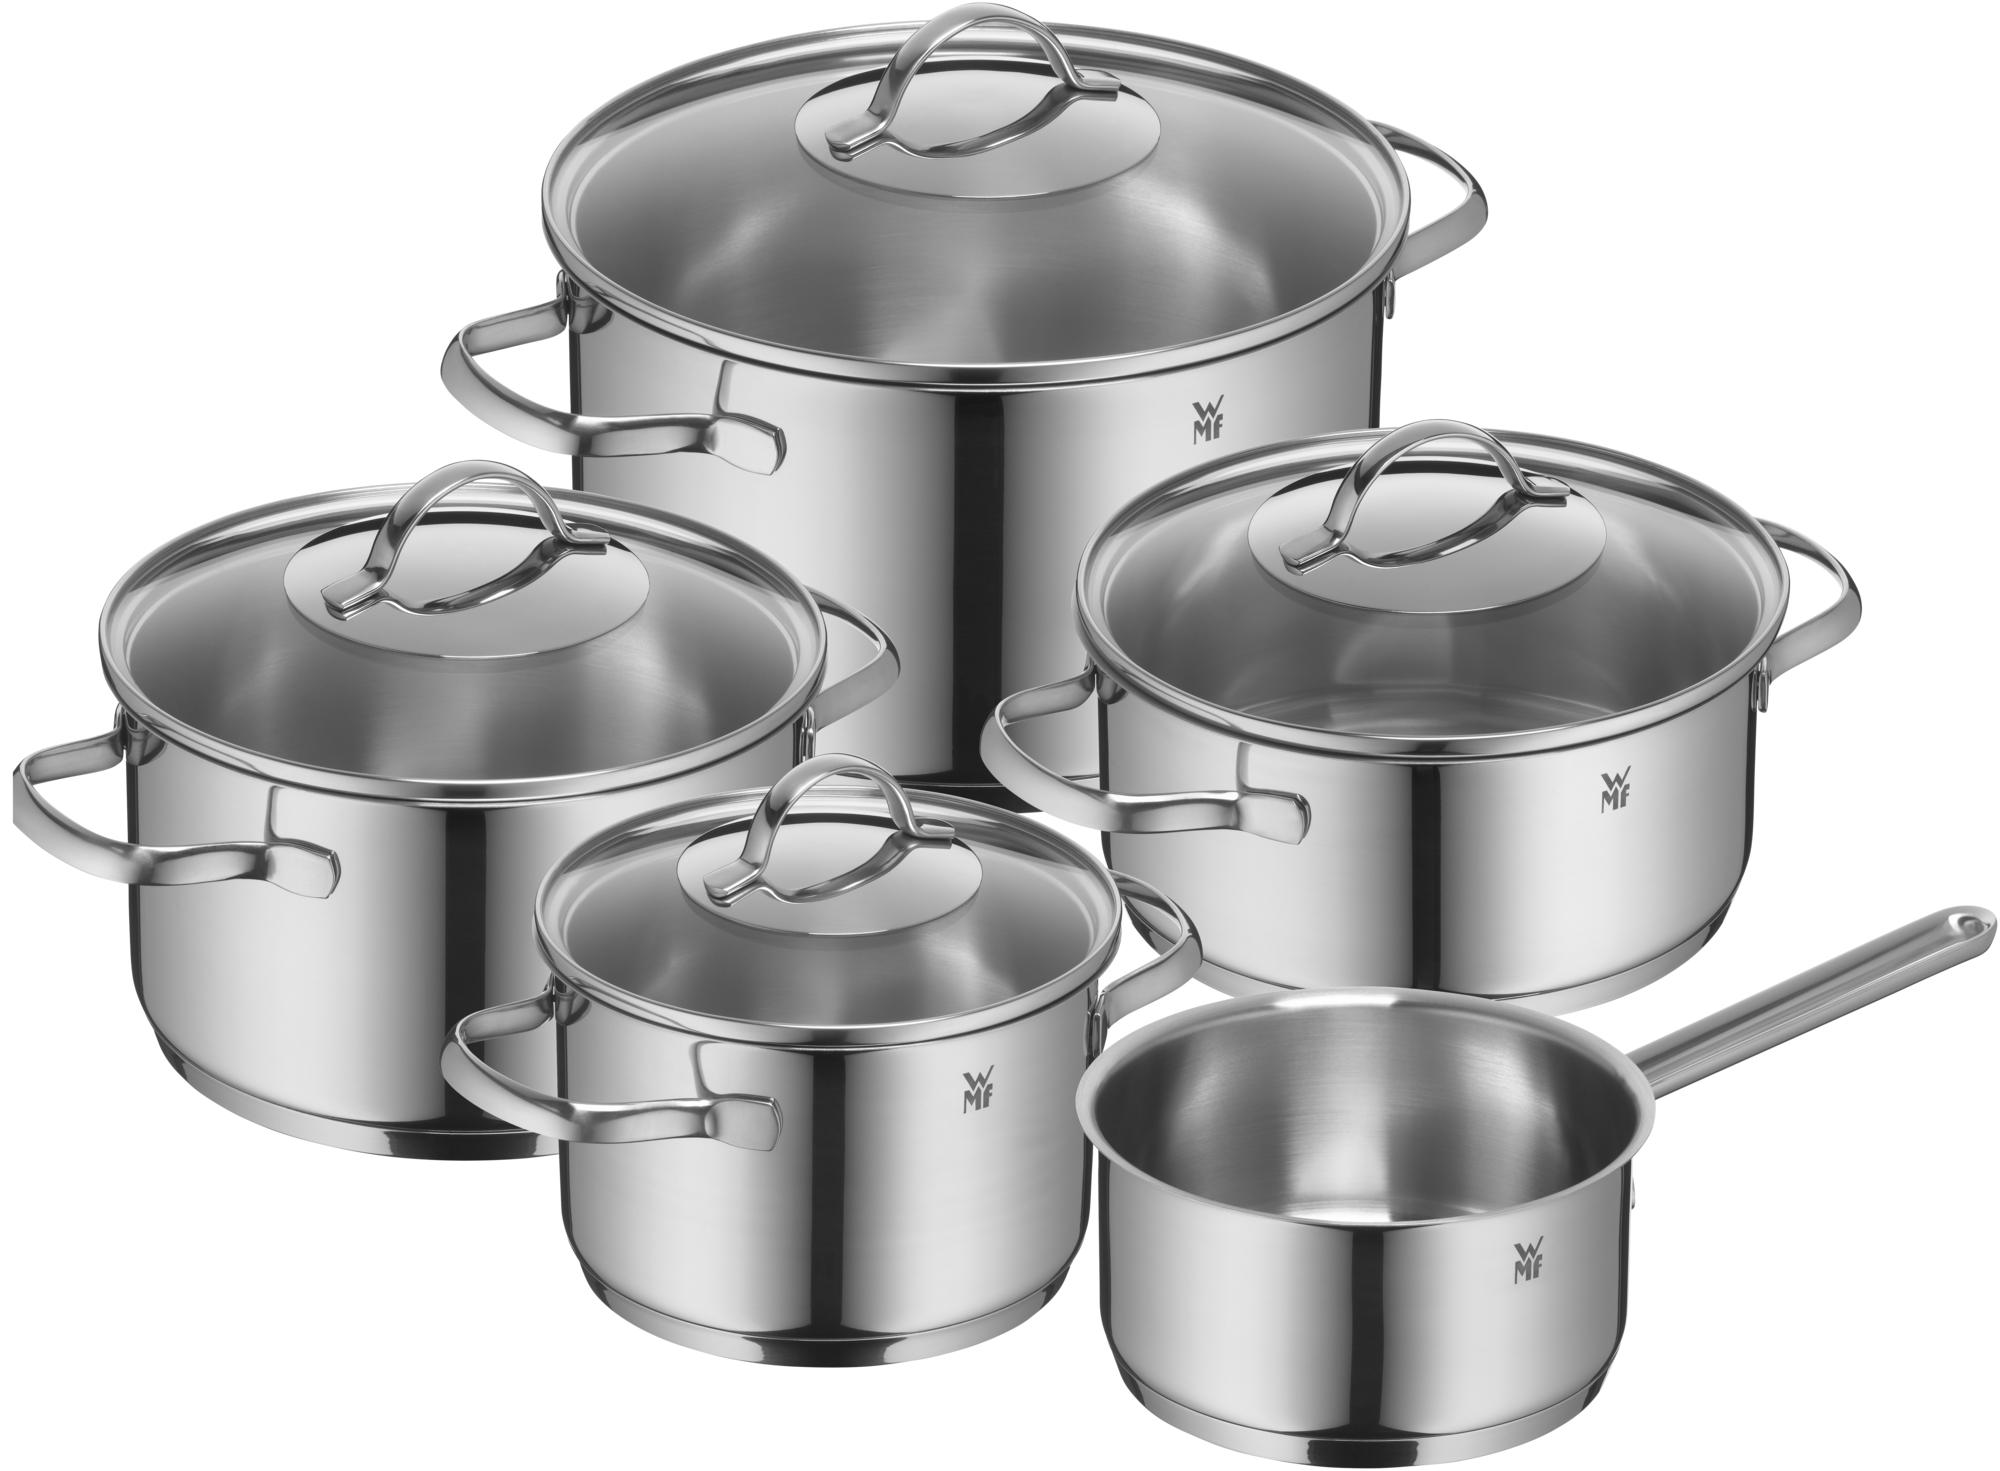 New arrivals wide edge stainless steel capsulated induction bottom cookware set  casserole saucepan